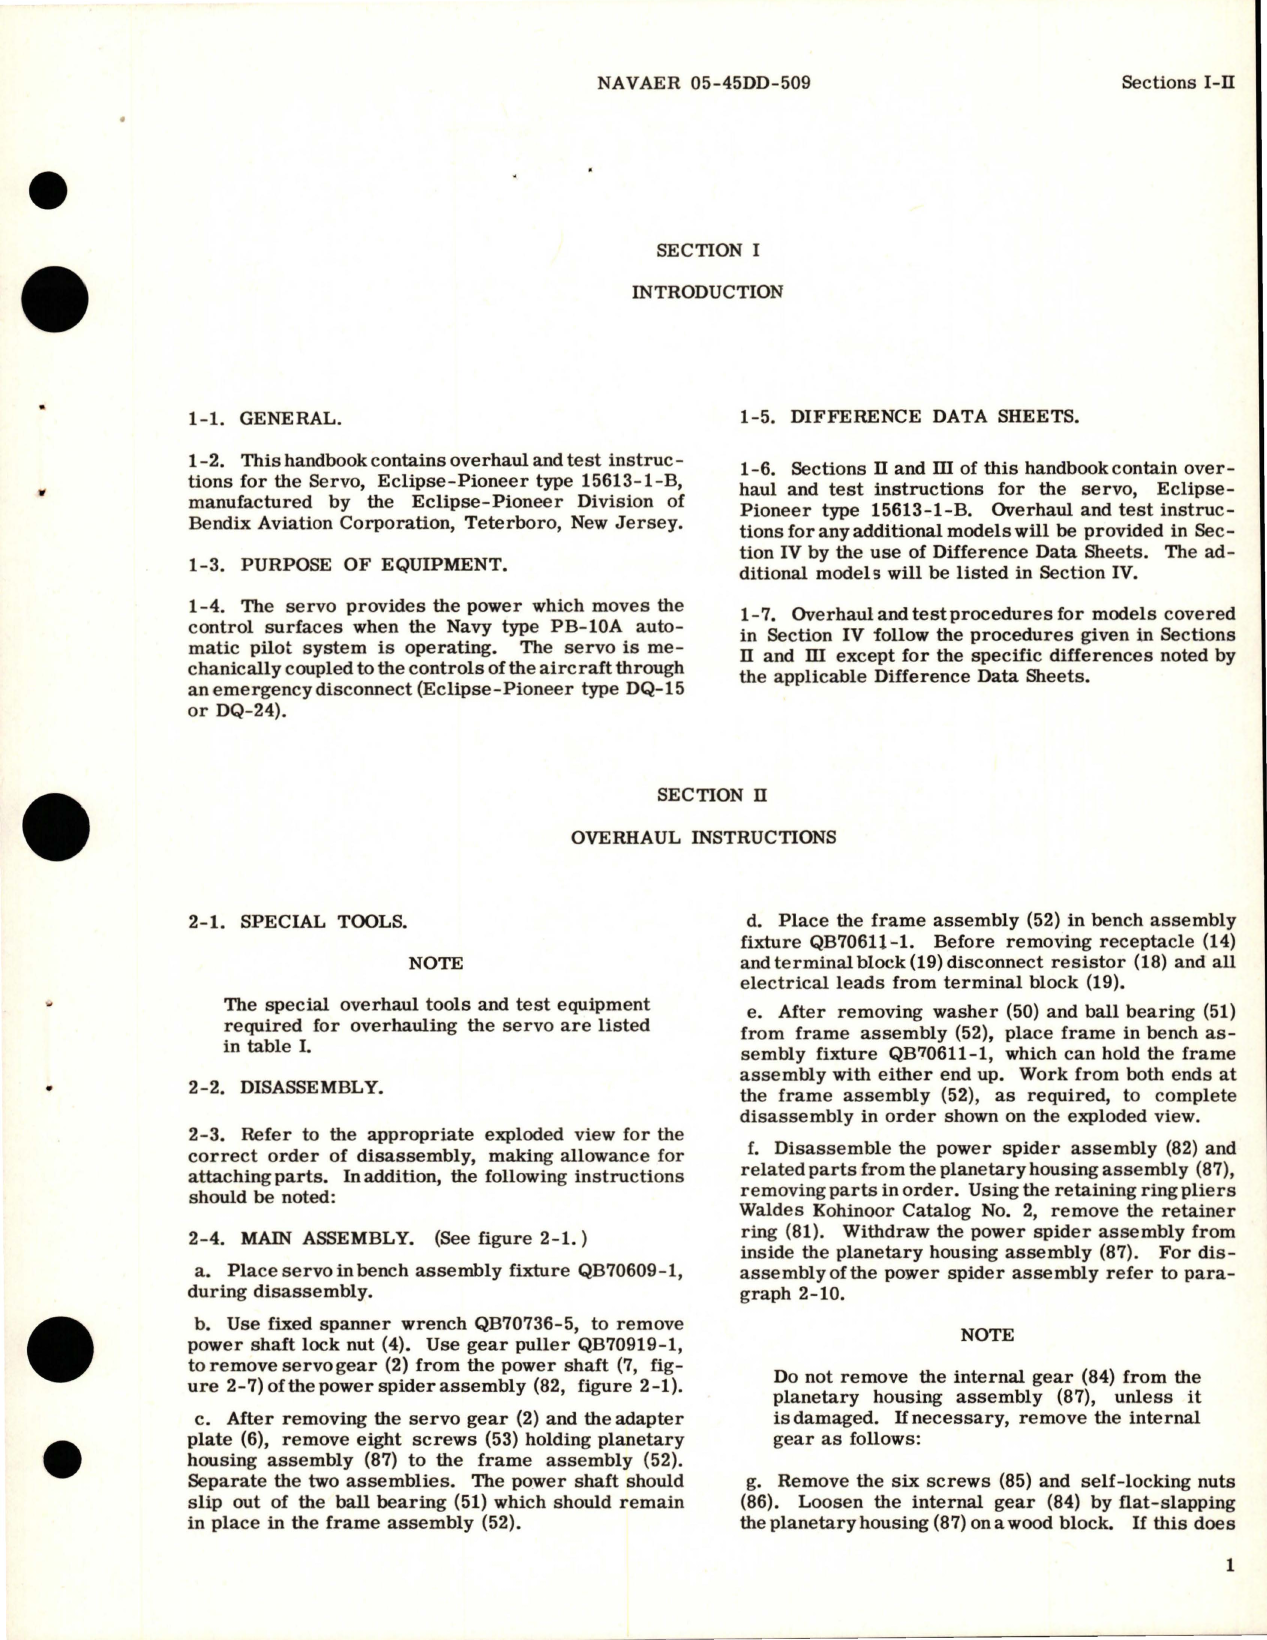 Sample page 5 from AirCorps Library document: Overhaul Instructions for Servo - Part 15613-1-B 